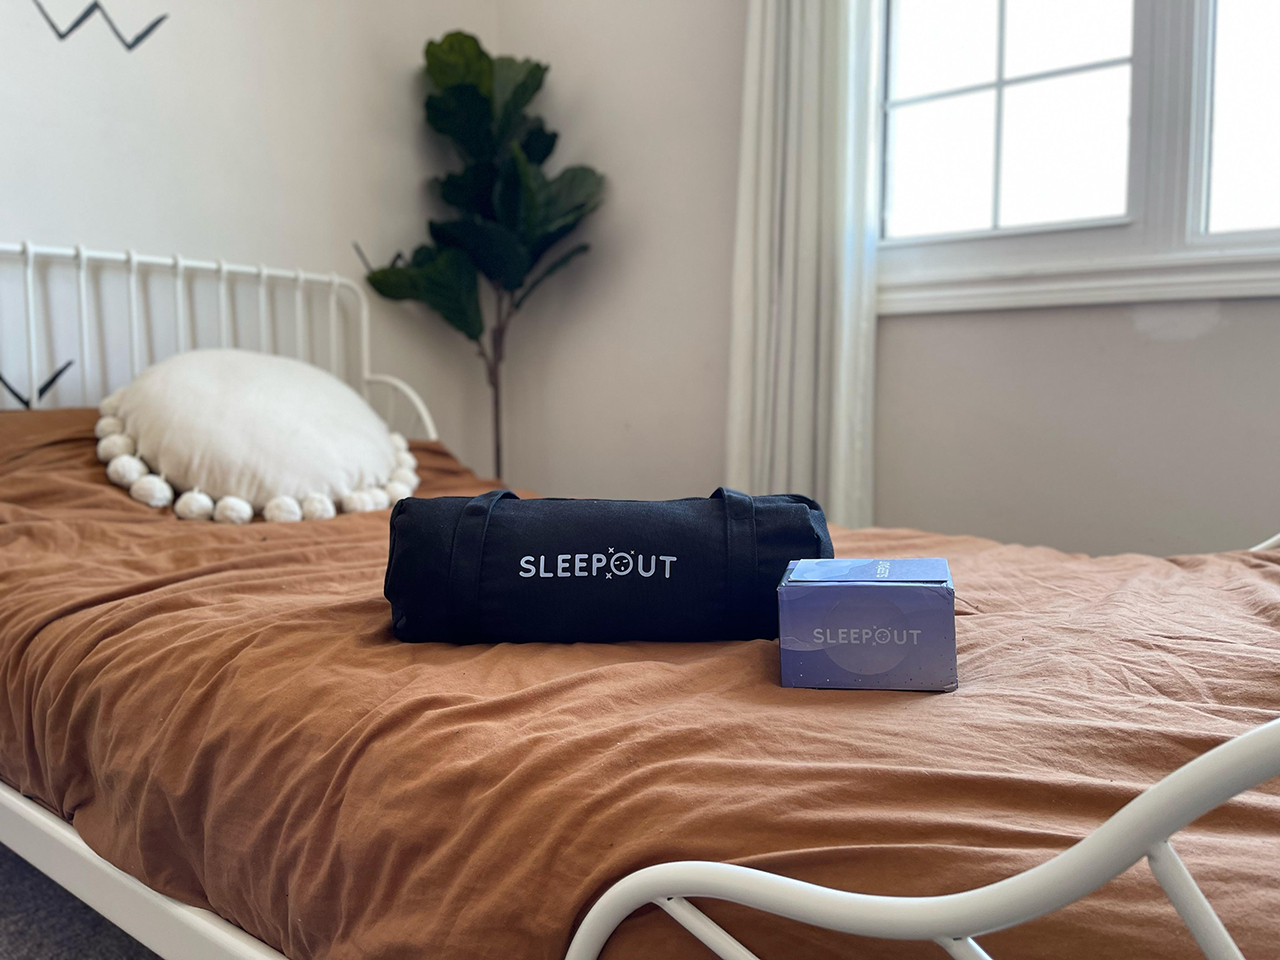 Sleepout navy bag and box on top of a bed with brown bedsheets. 